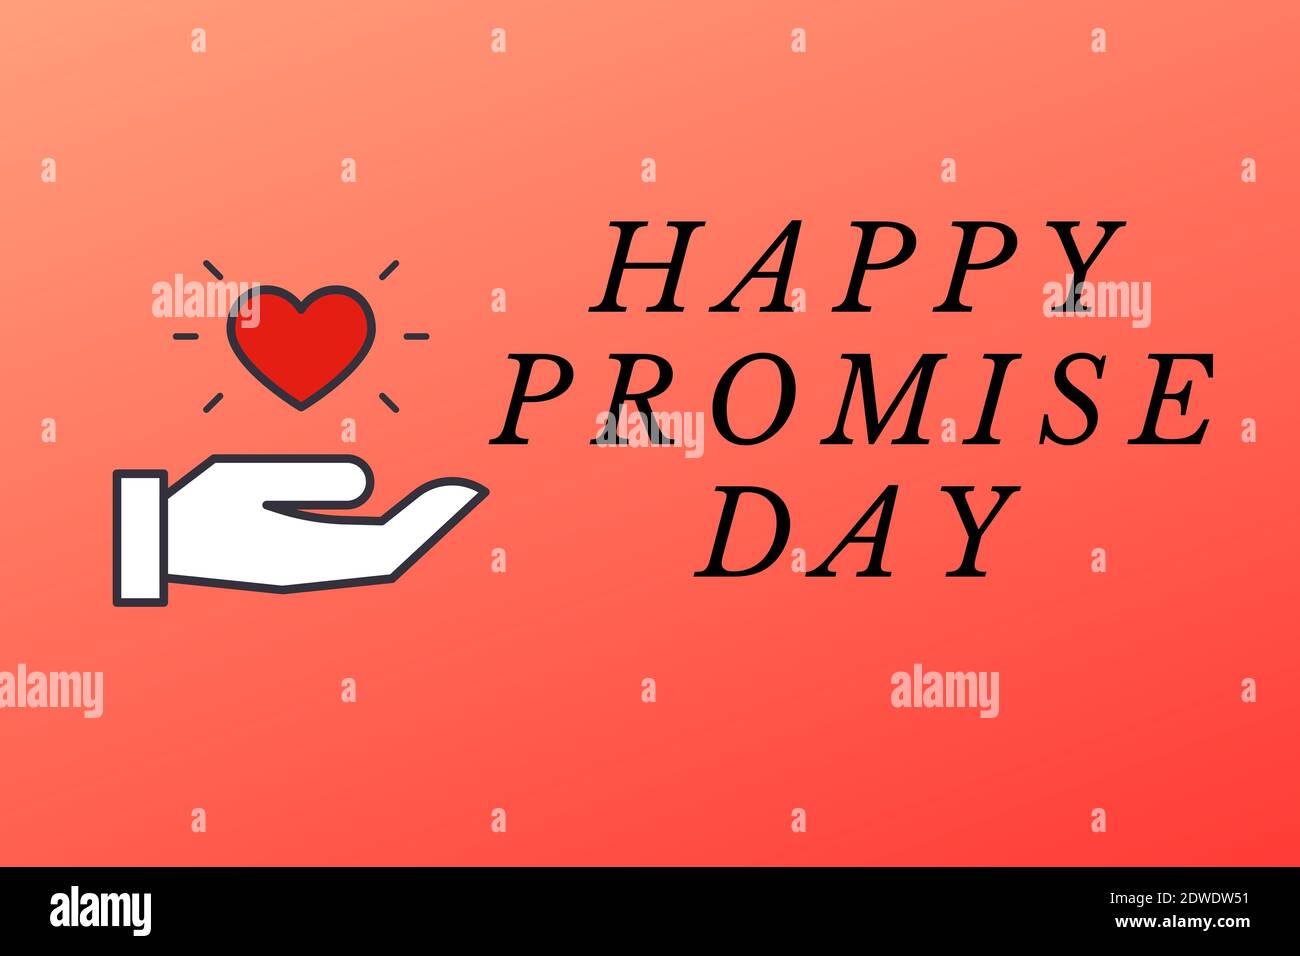 Happy Promise Day Graphic Design With Red Background Stock Photo - Alamy